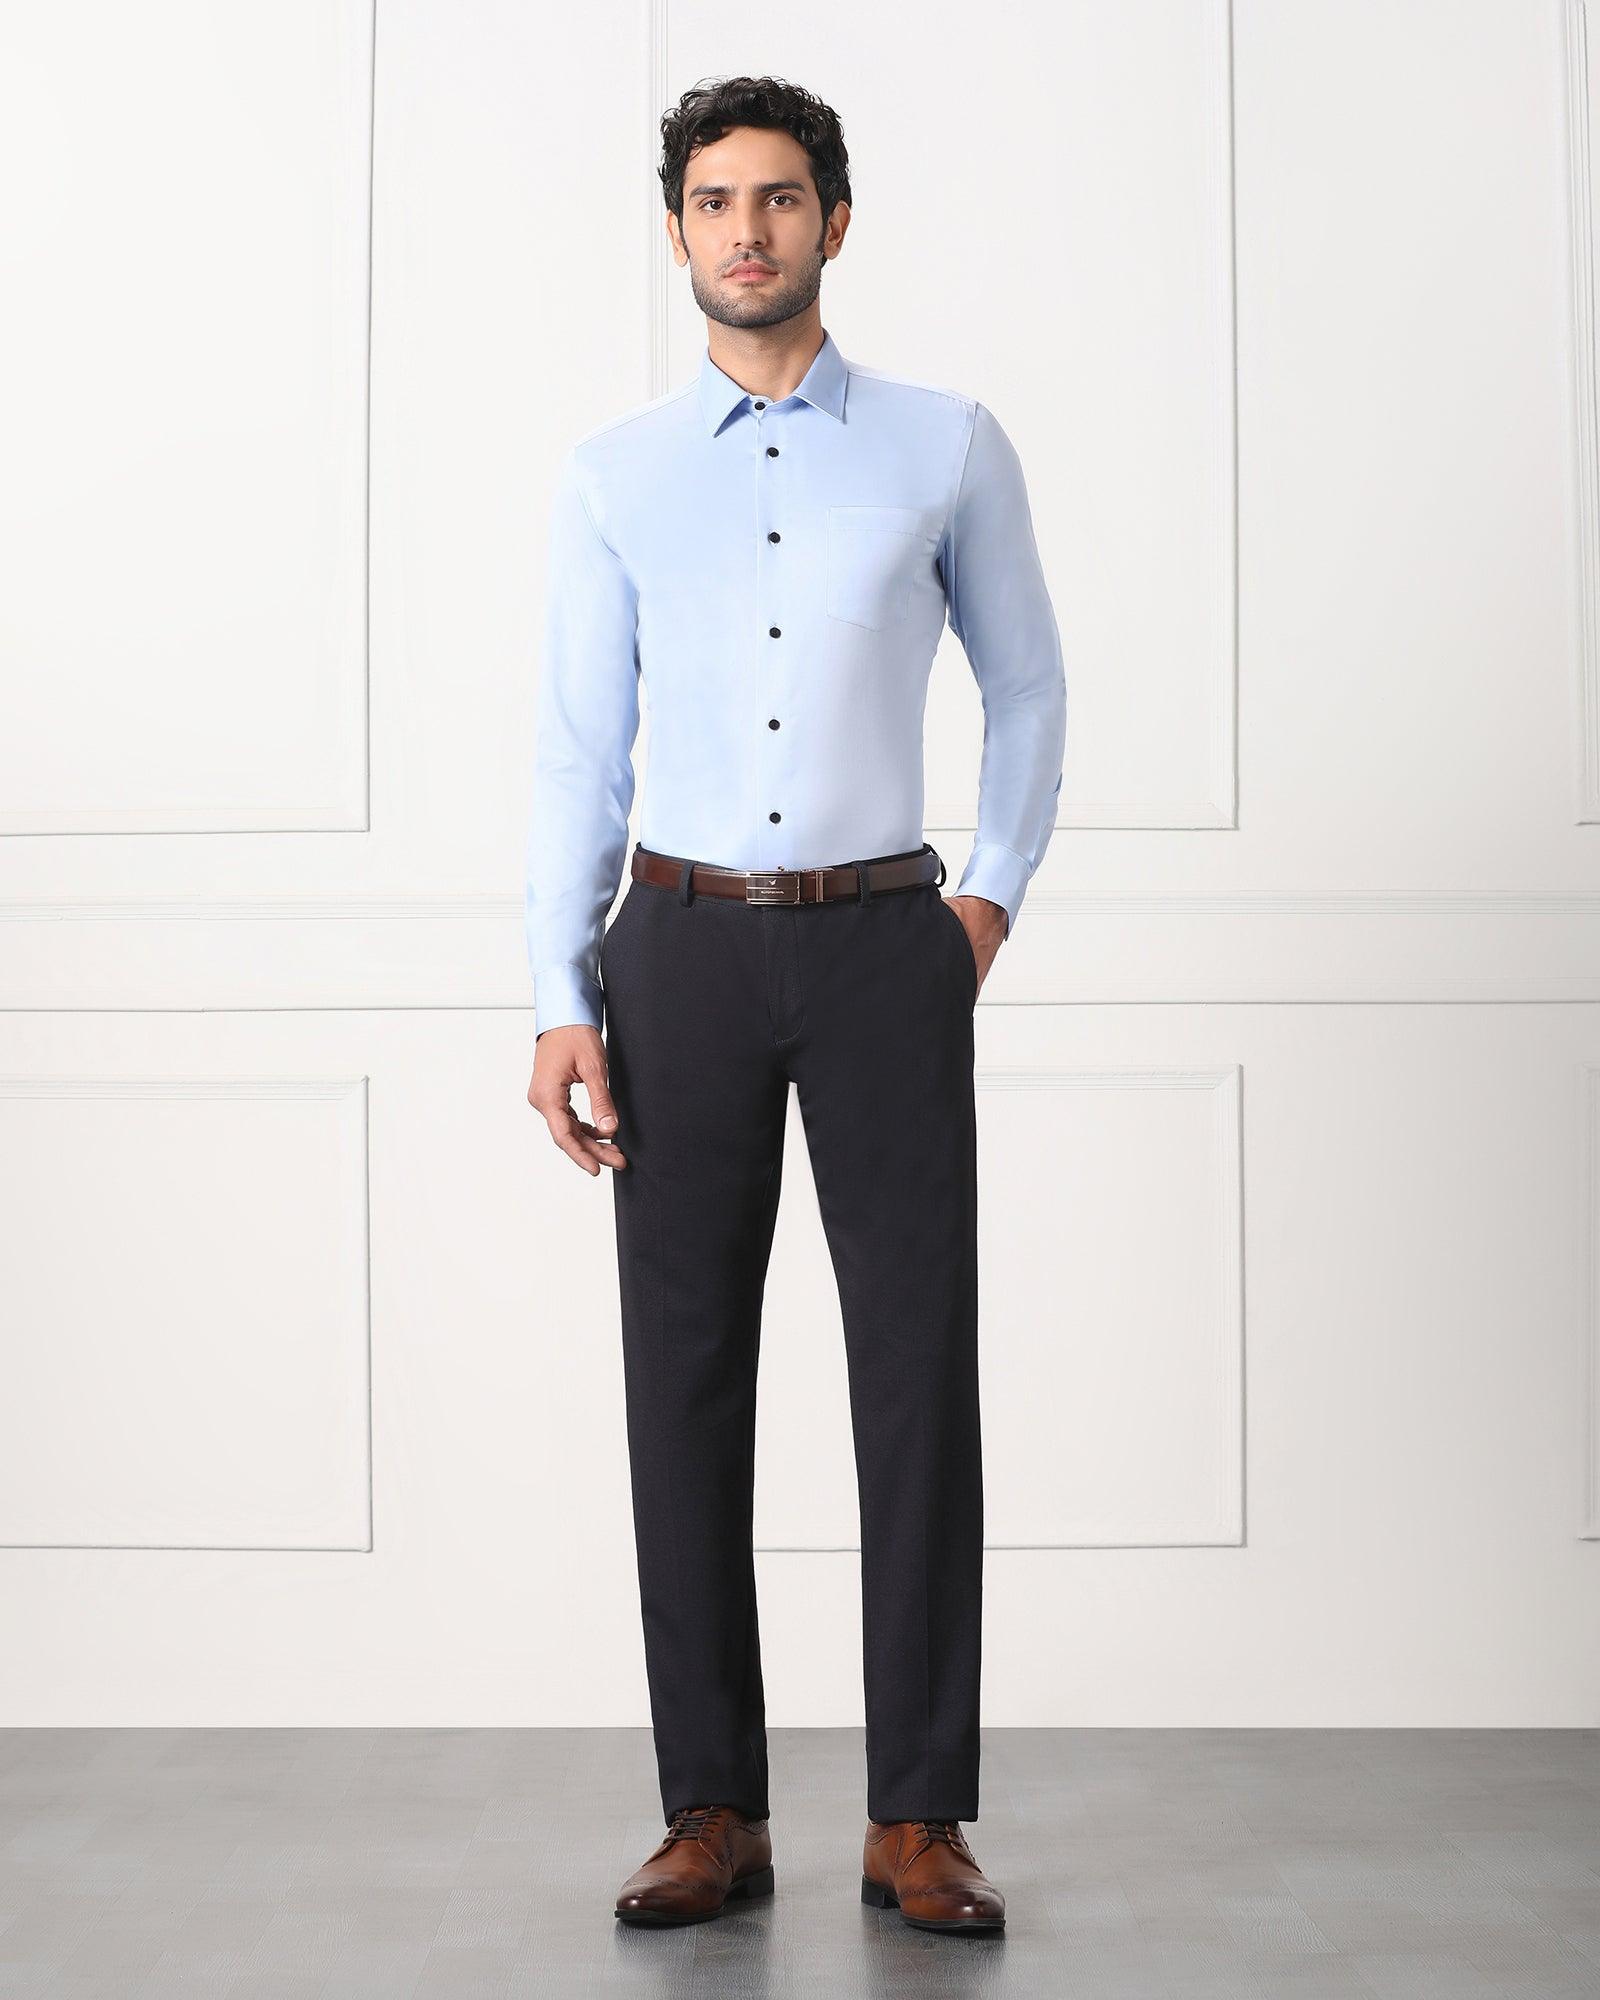 Zodiac Black Pant Matching Shirt - Get Best Price from Manufacturers &  Suppliers in India